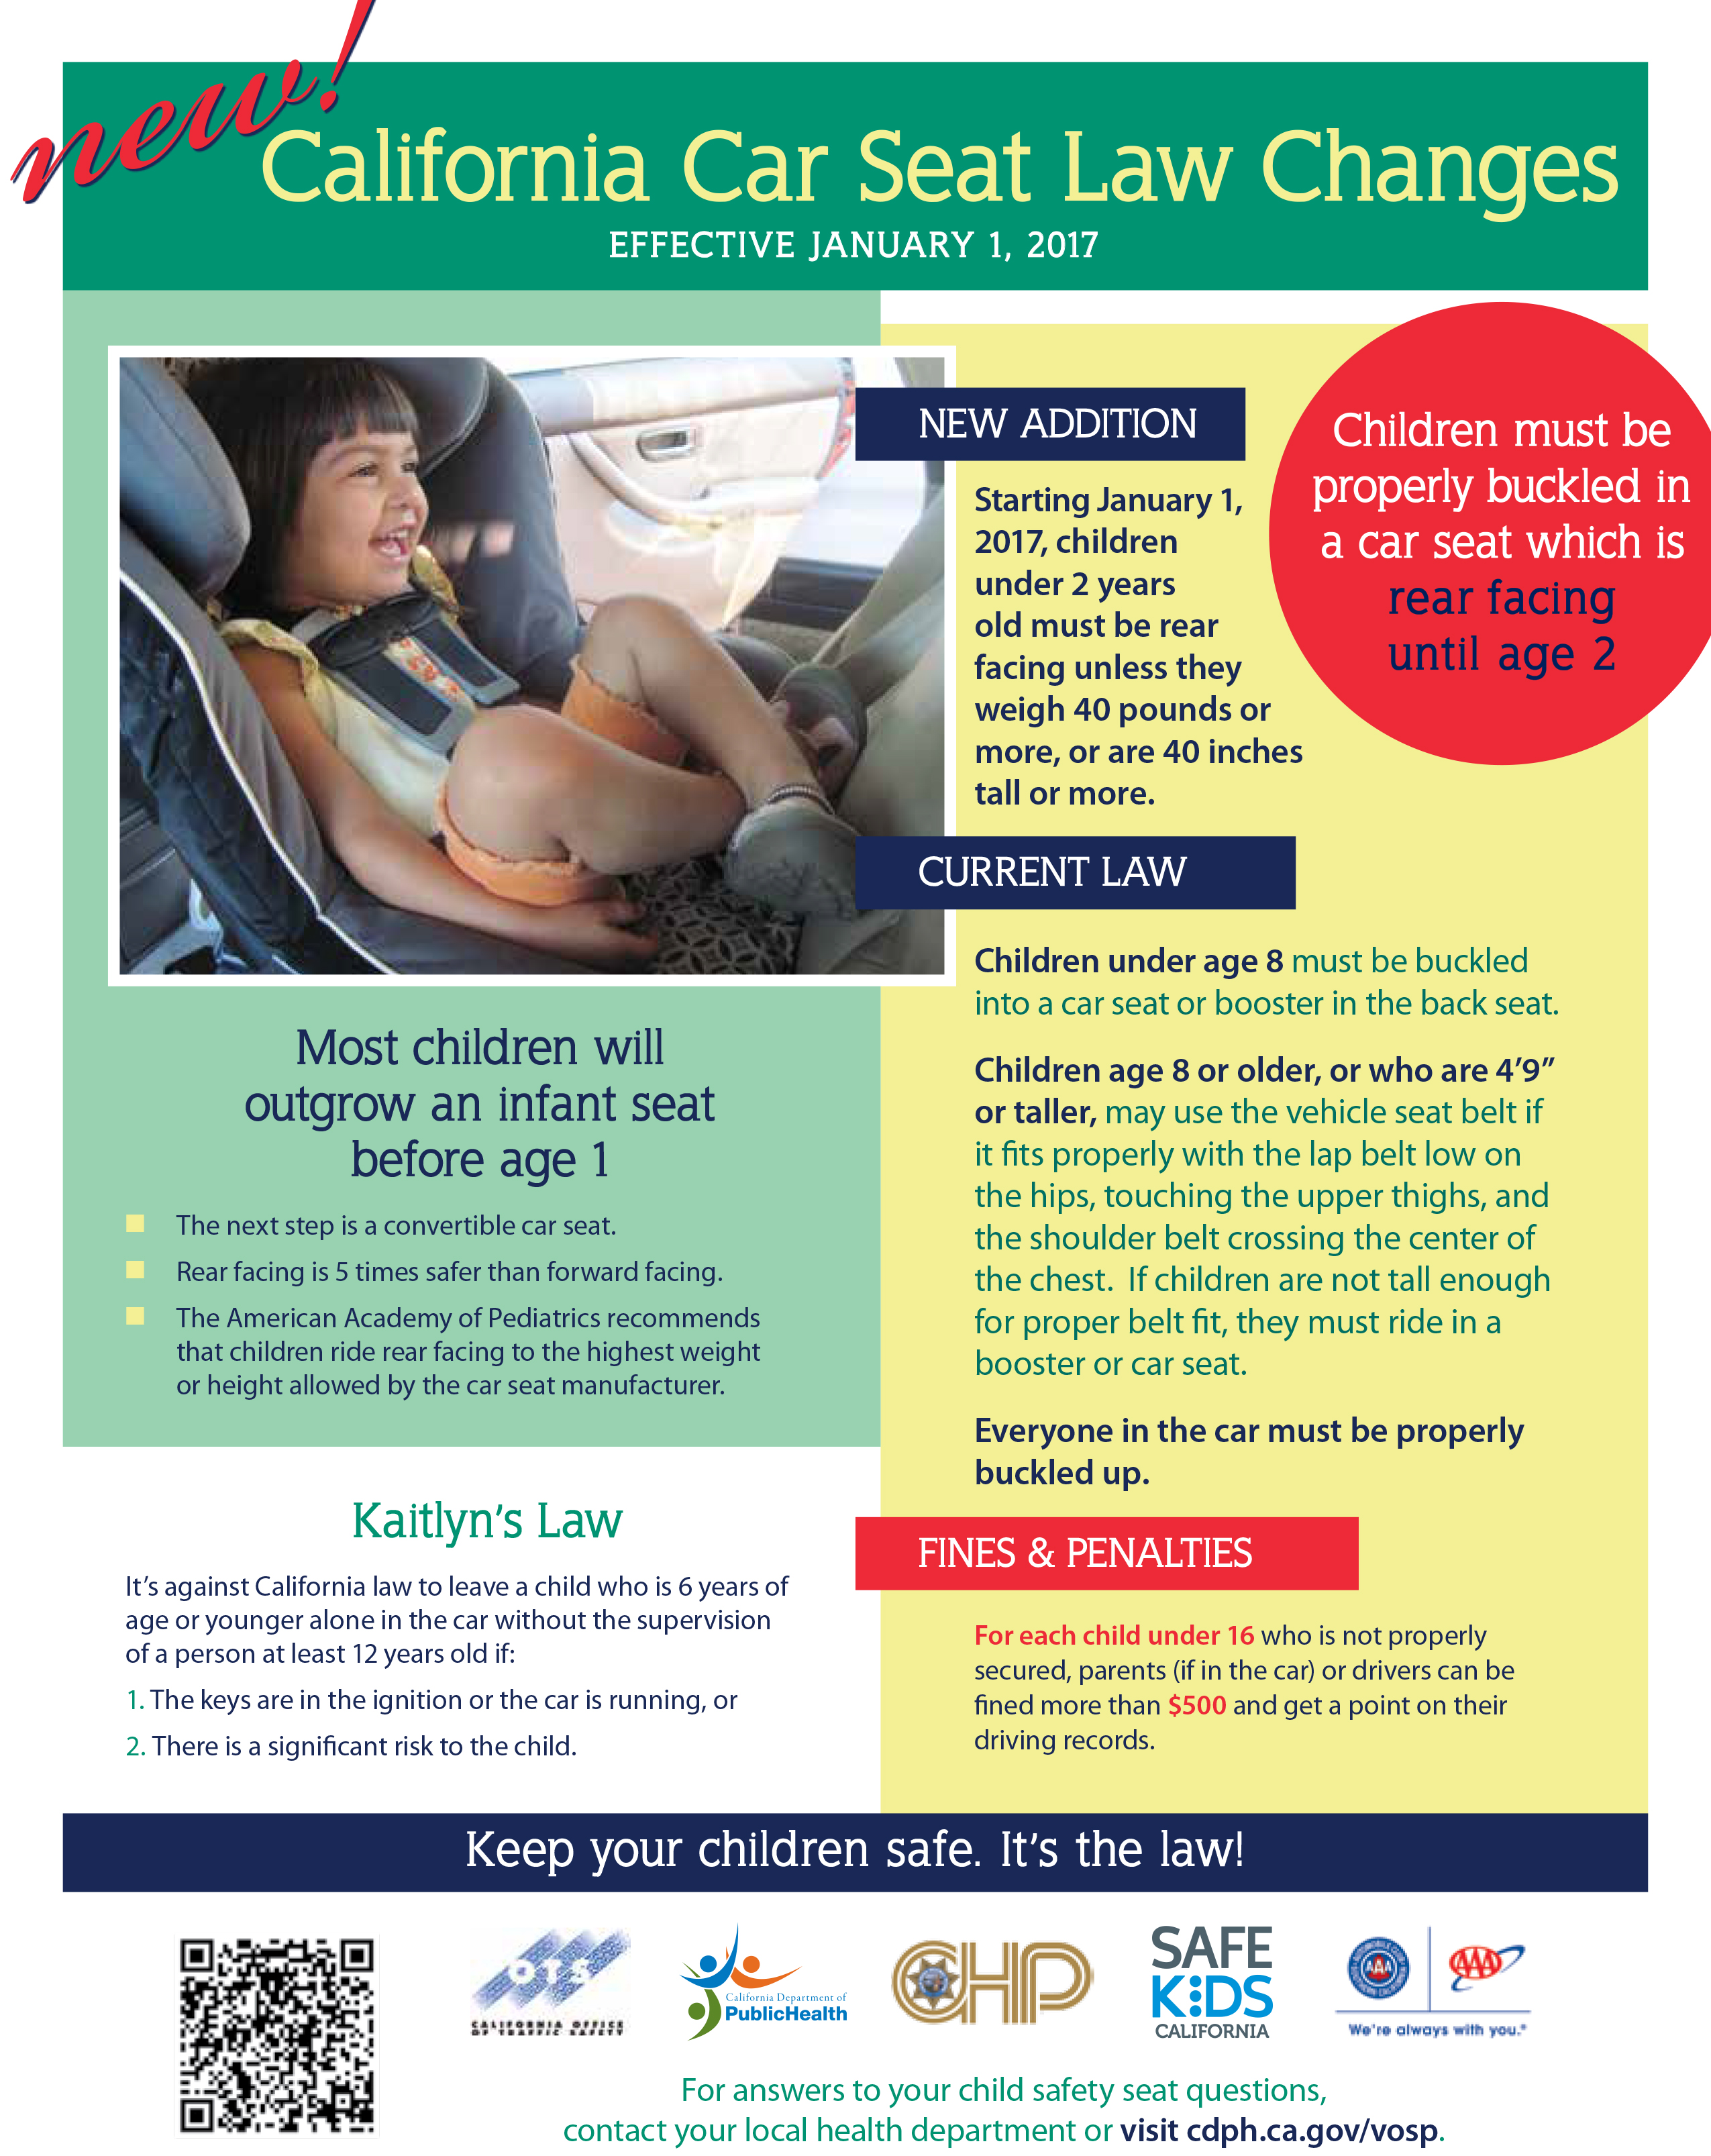 Children Now Required To Stay Rear, When Can A Baby Face Forward In Car Seat California